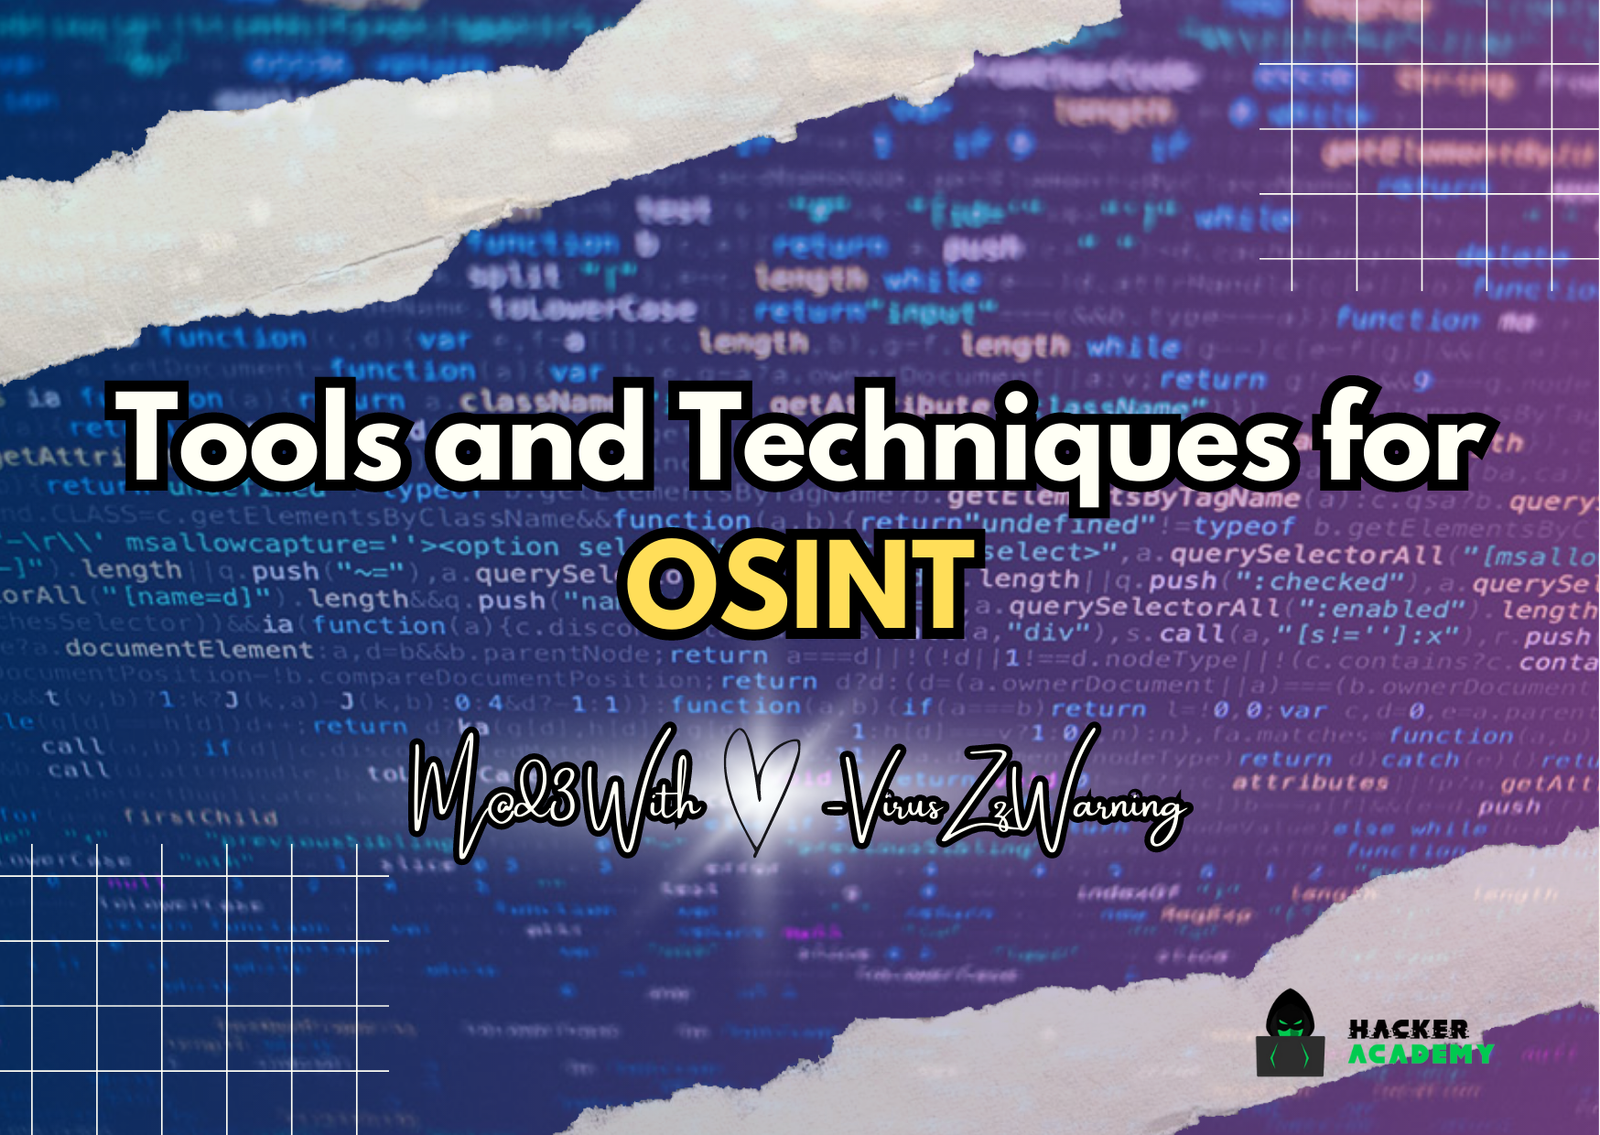 Tools and Techniques for OSINT